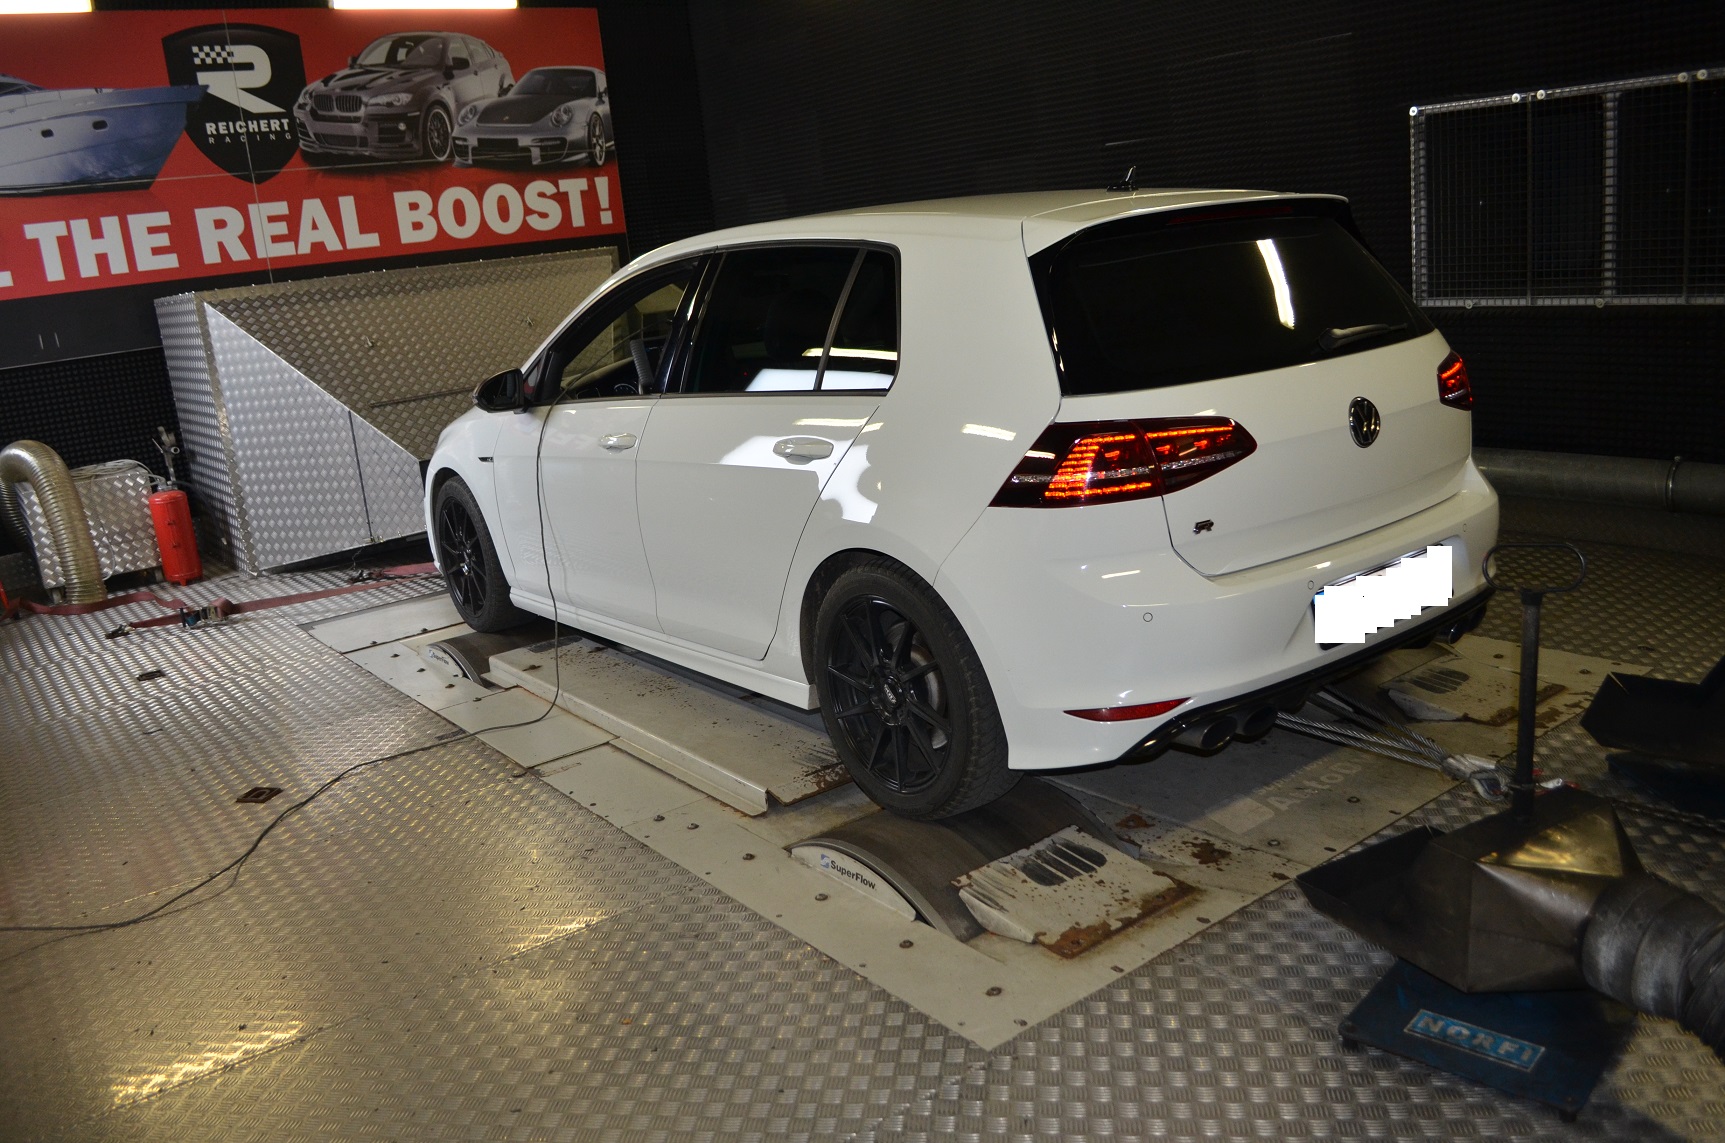 Volkswagen Golf 7 GTI Clubsport 2.0 TSI 265PS Stage 1 Chiptuning